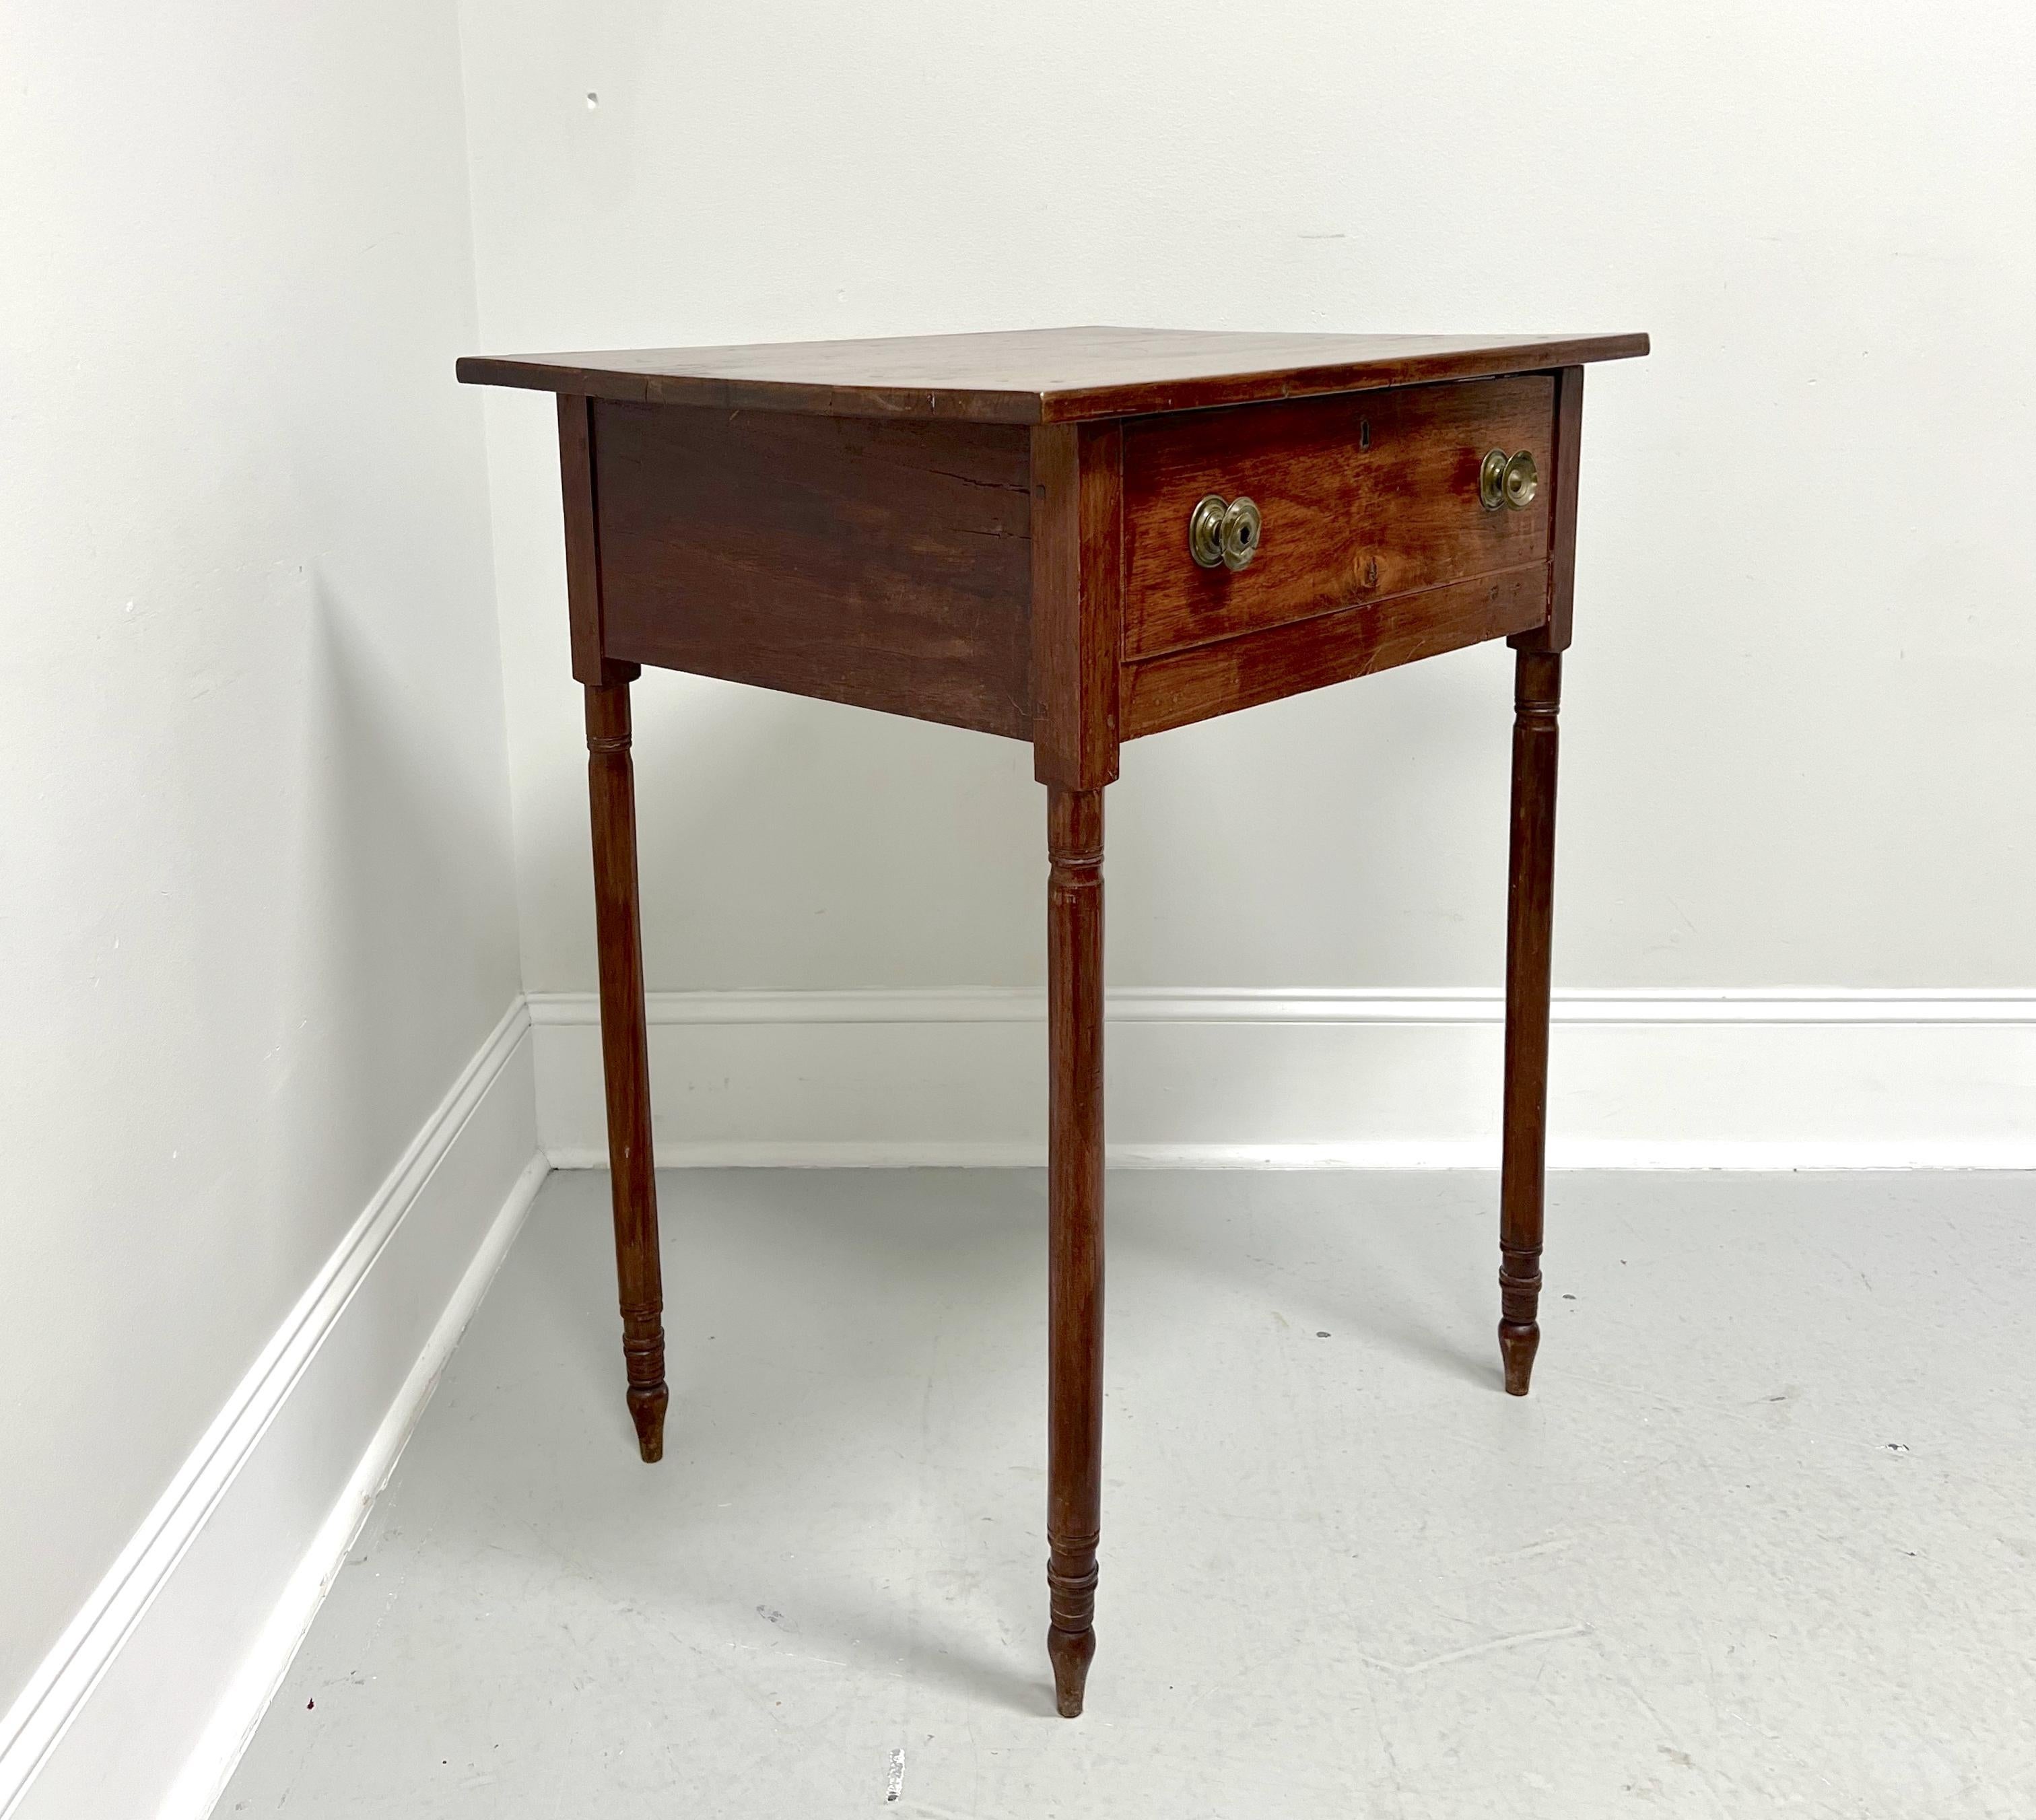 An antique 19th Century rustic side table, unbranded. Handcrafted of walnut, naturally distressed from age, squared edge to top, brass hardware, and turned straight legs. Features one lockable drawer of rabbet joint construction. Likely made in the